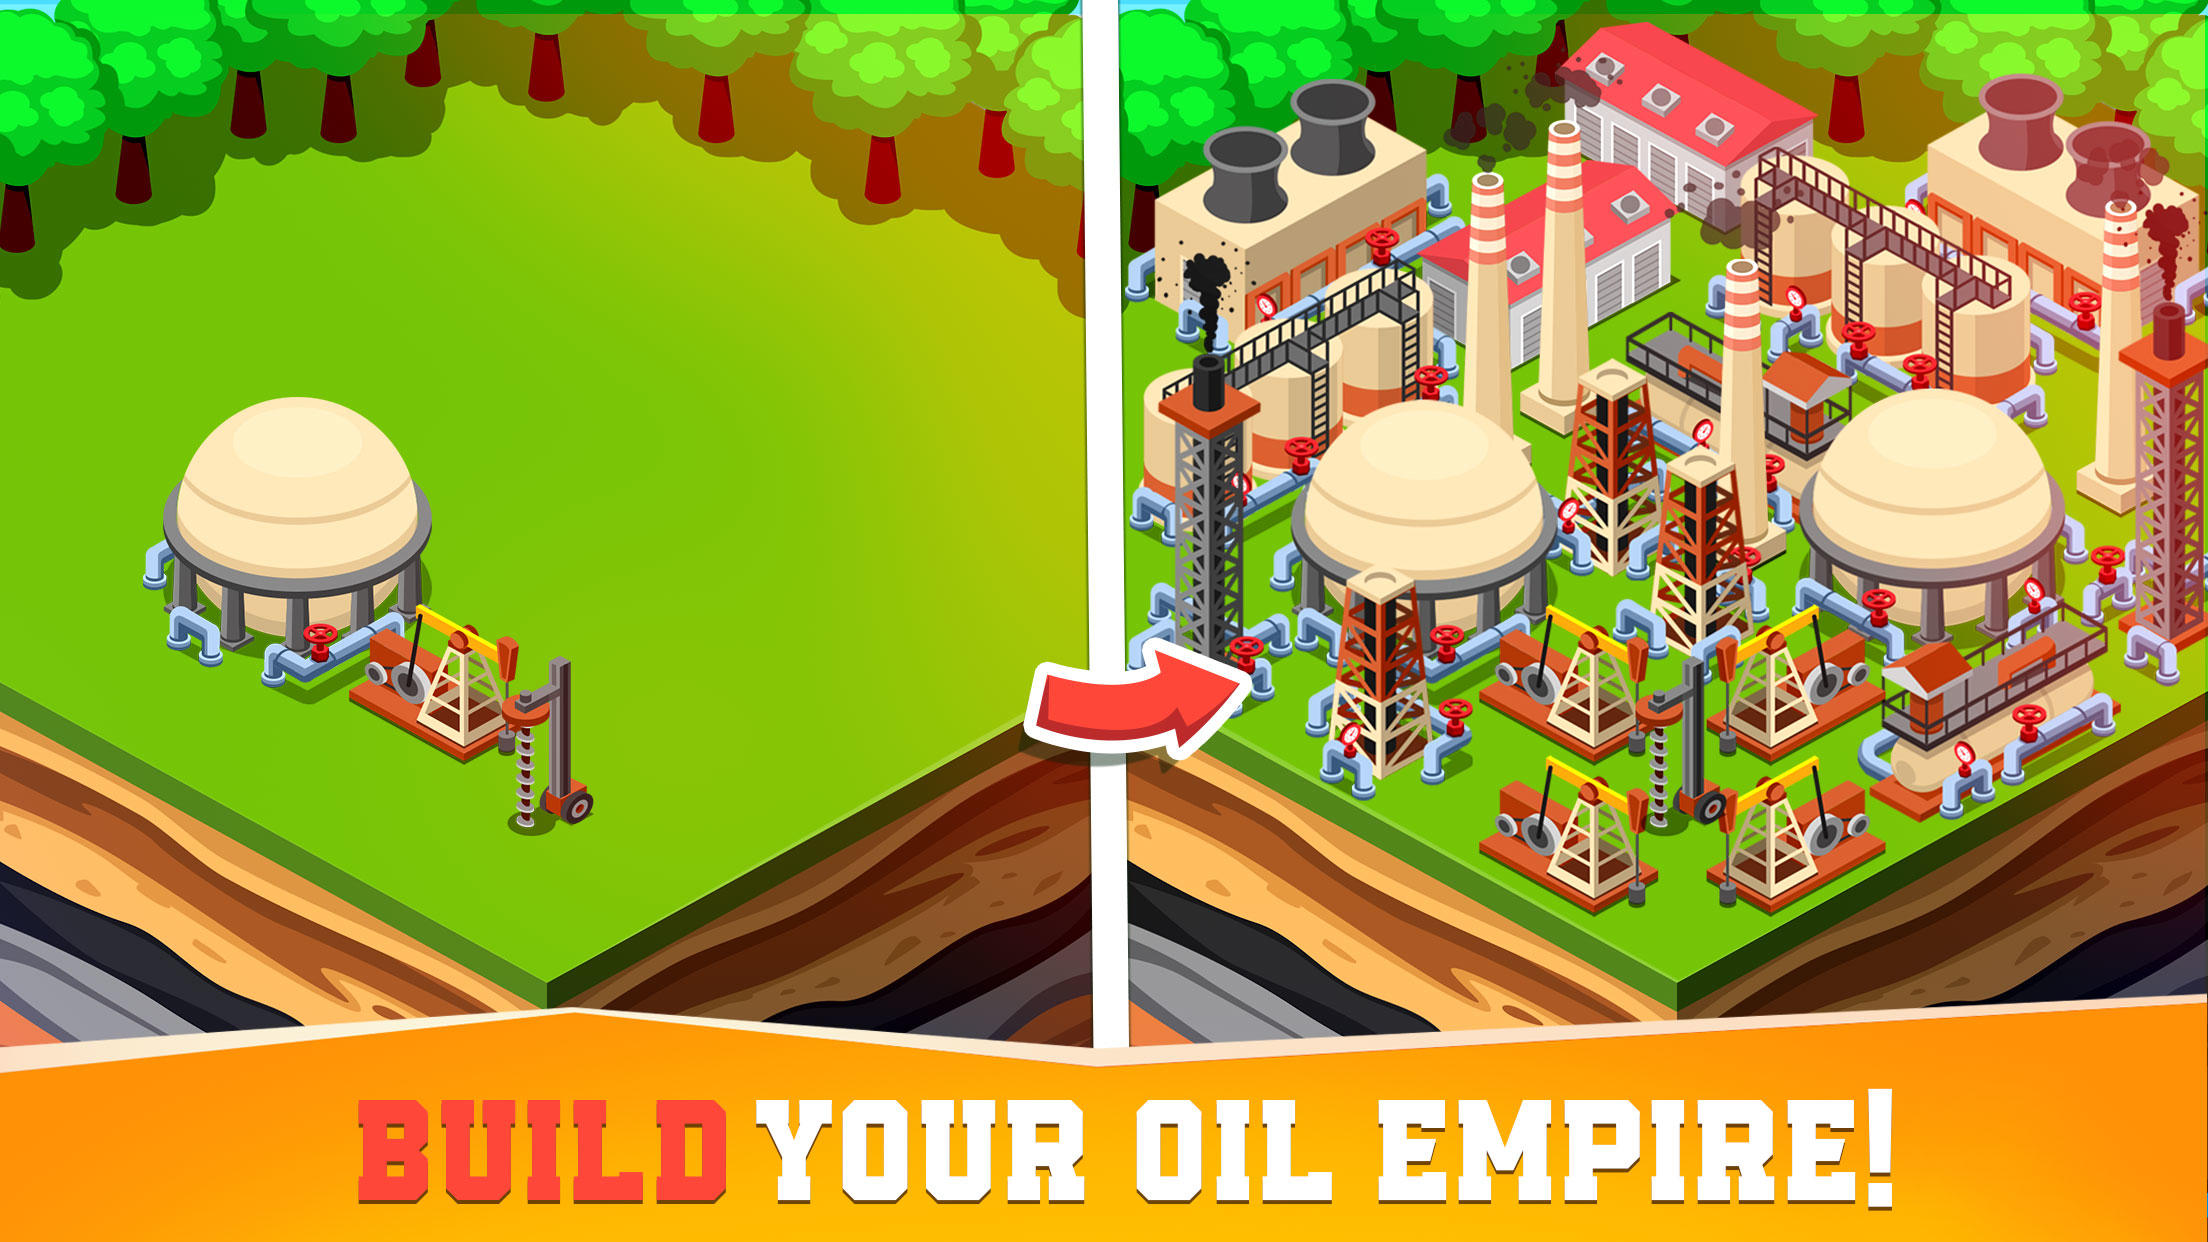 Screenshot 1 of Oil Tycoon - Idle Clicker Game 3.2.1